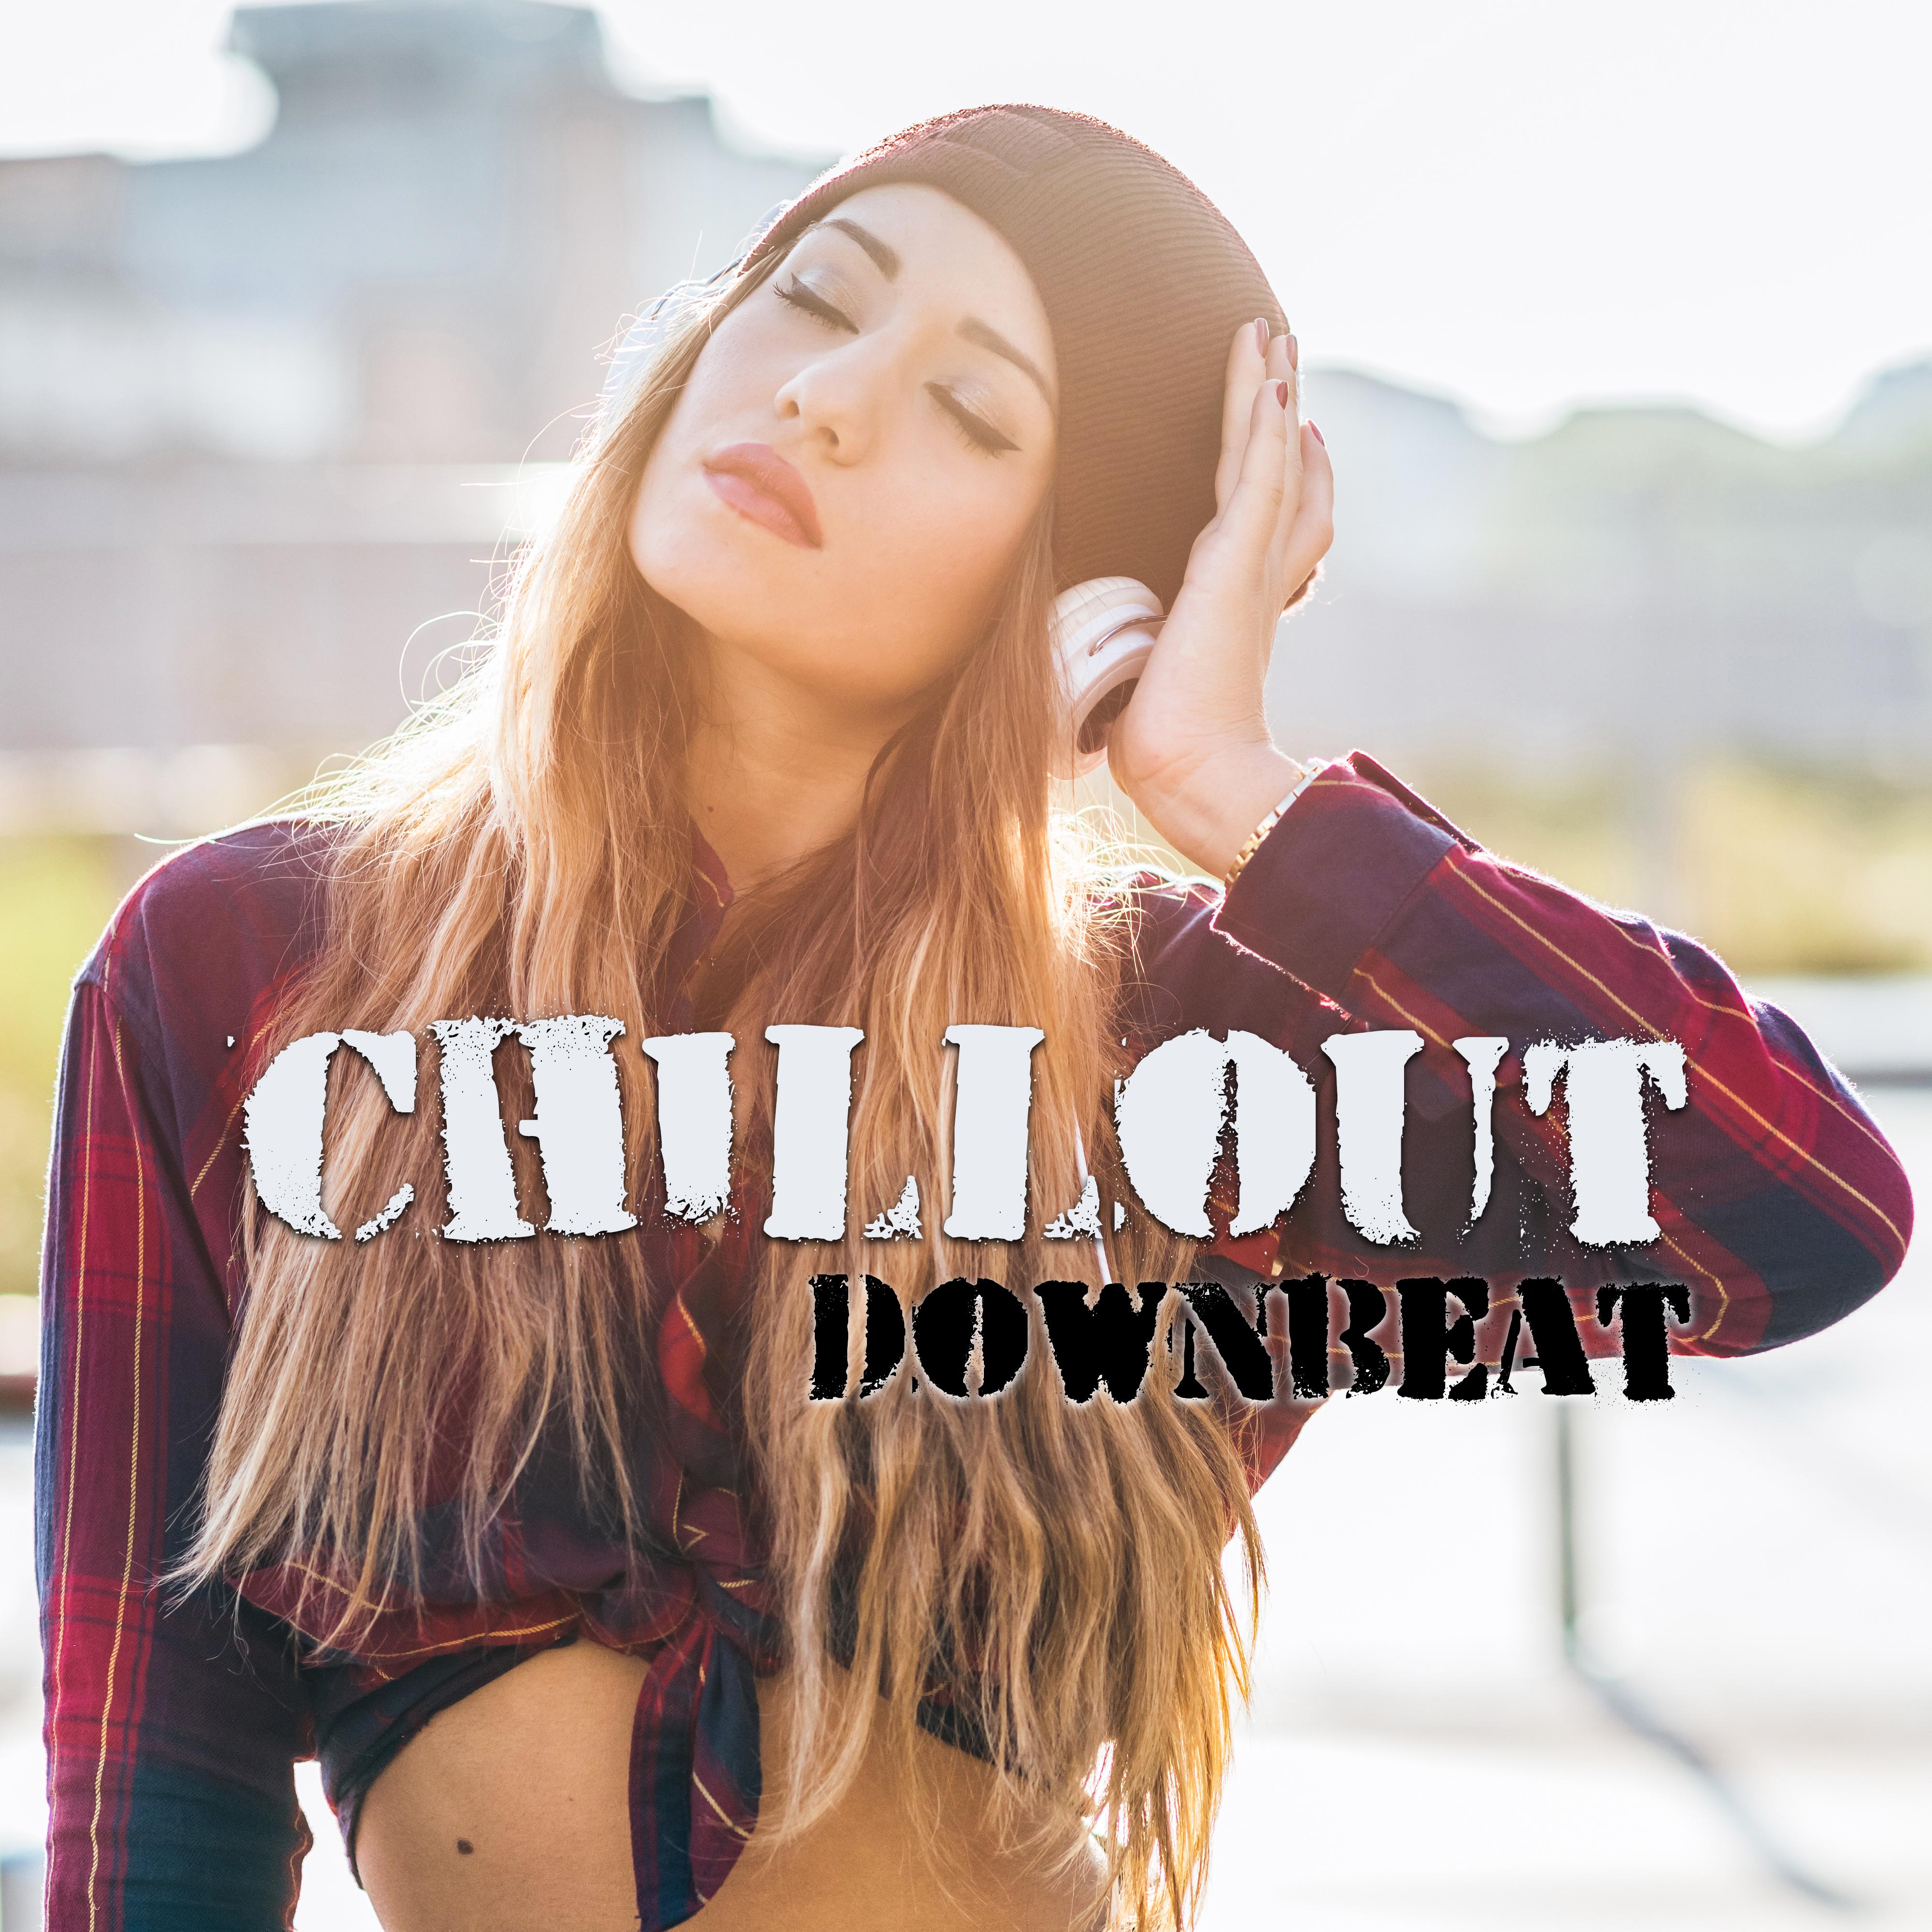 Chillout Downbeat – Lounge, Electronic, Ambient Music, Chill Out 2017, Summer Hits